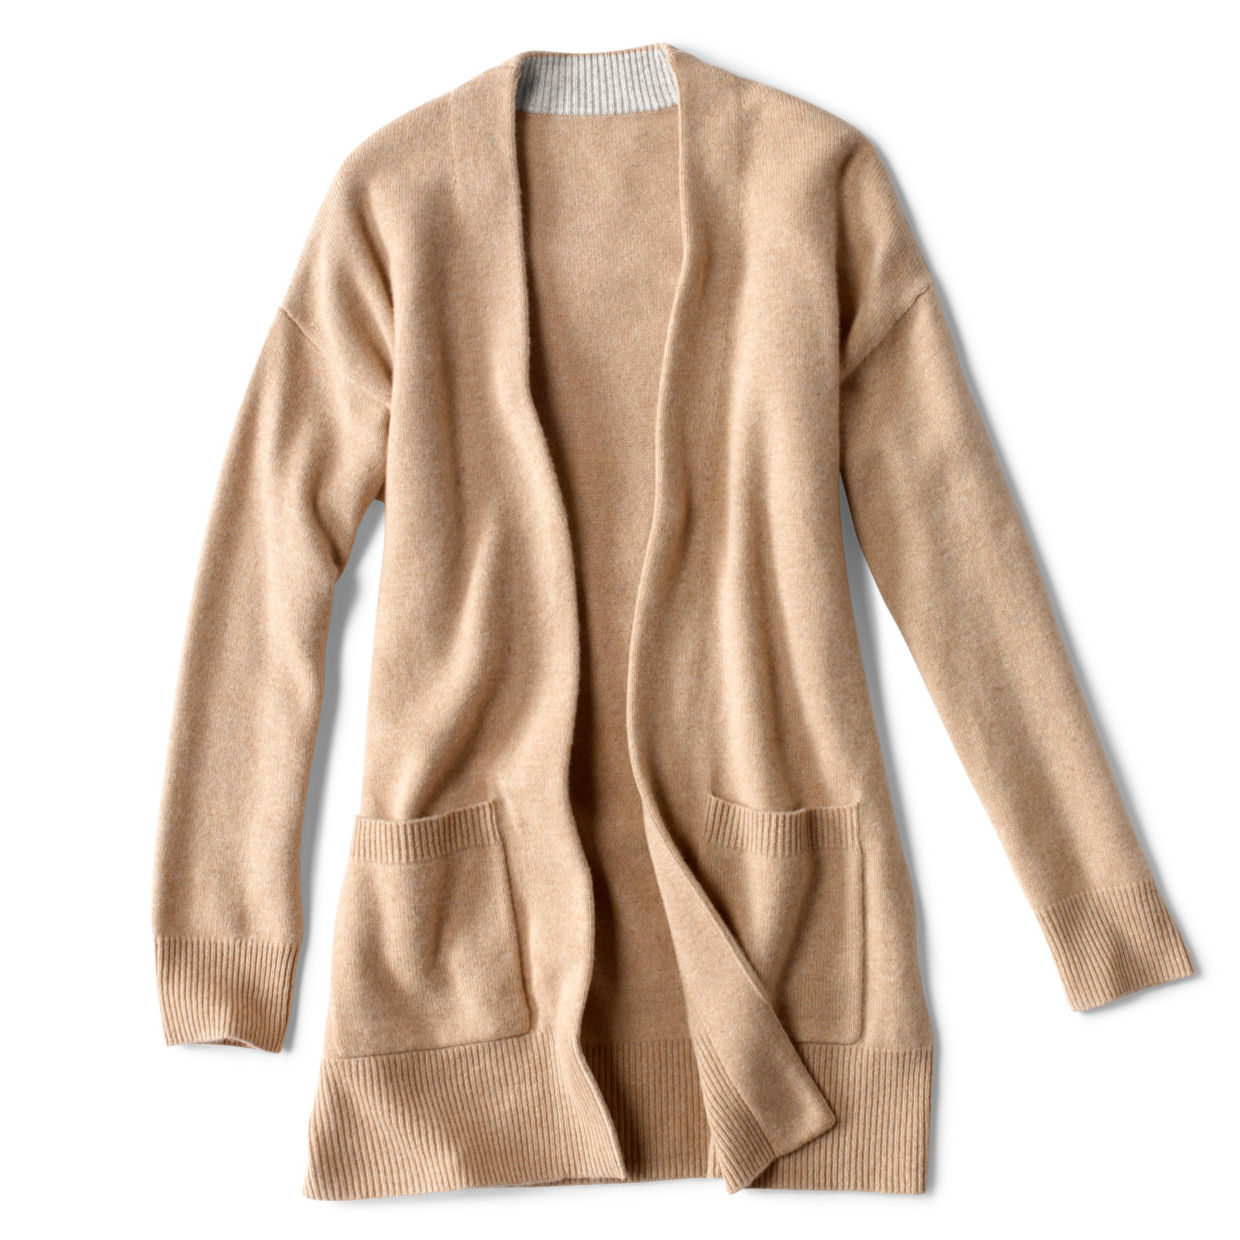 Image of Cashmere Open Front Cardigan Sweater